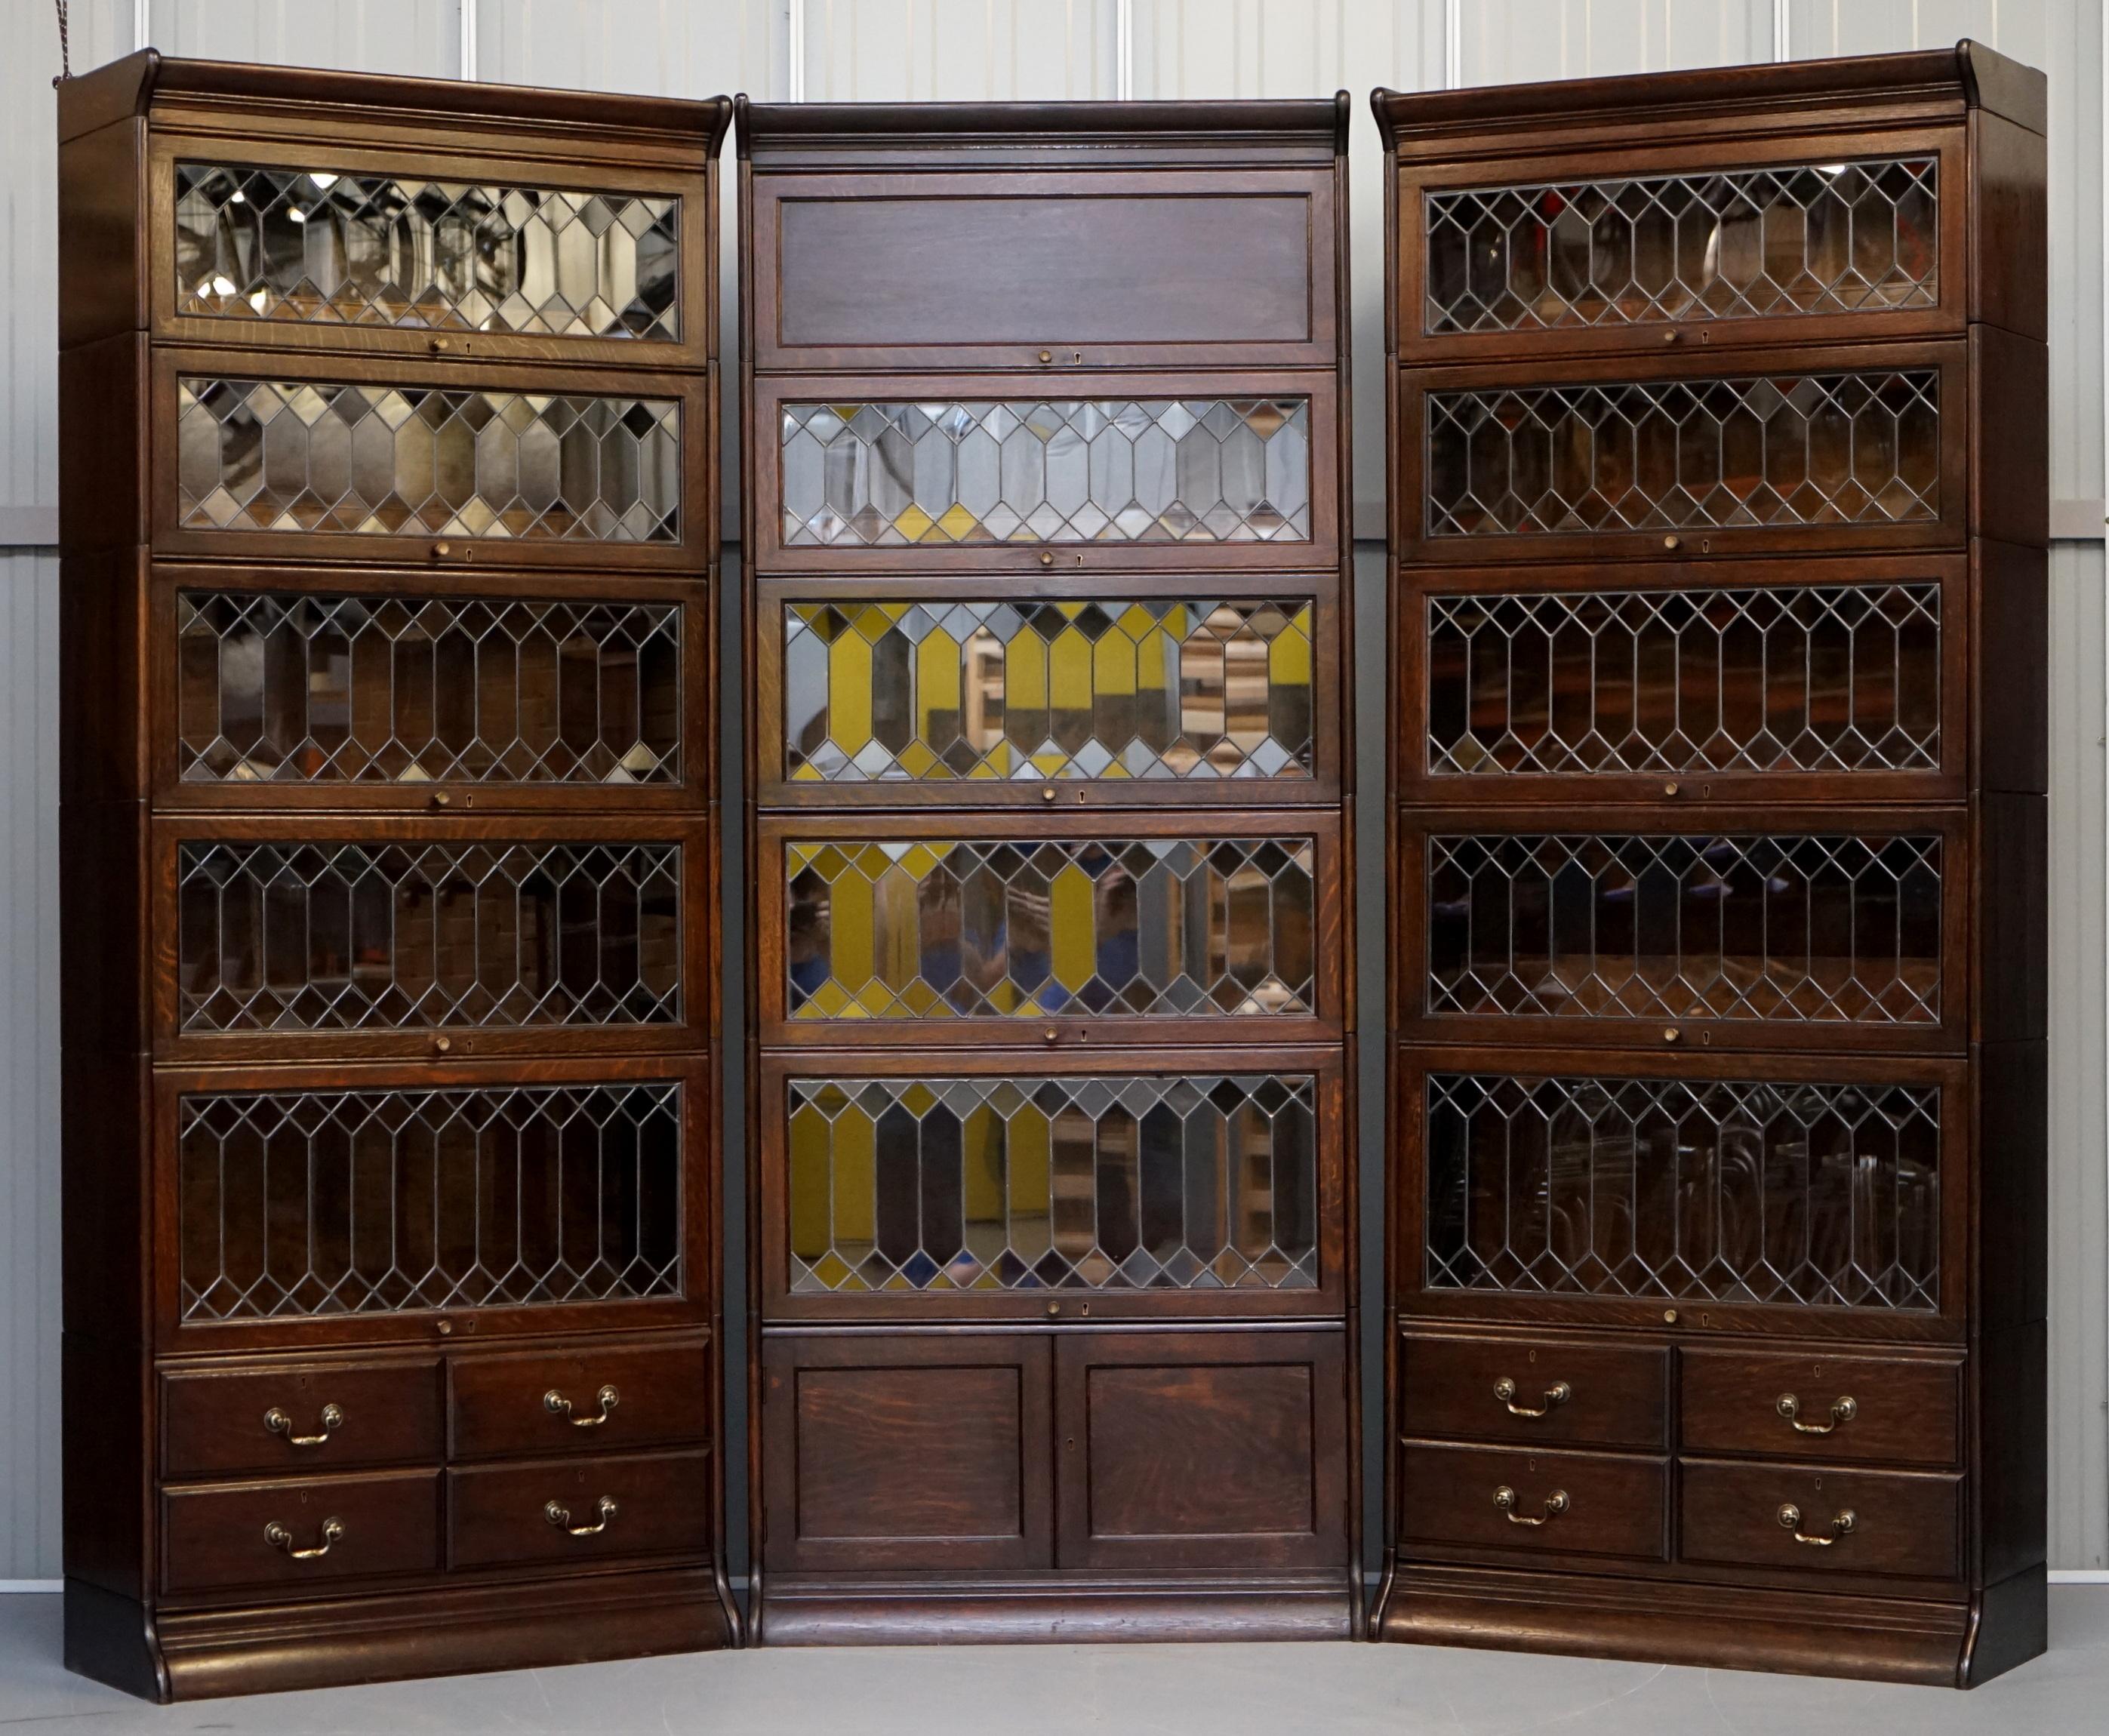 We are delighted to this very rare circa 1910 suite of three Legal stacking bookcases with lead lined glass made by Gunn in solid oak and with all original solid brass Angus of Scotland & England locks 

This is an exceptionally rare find, firstly